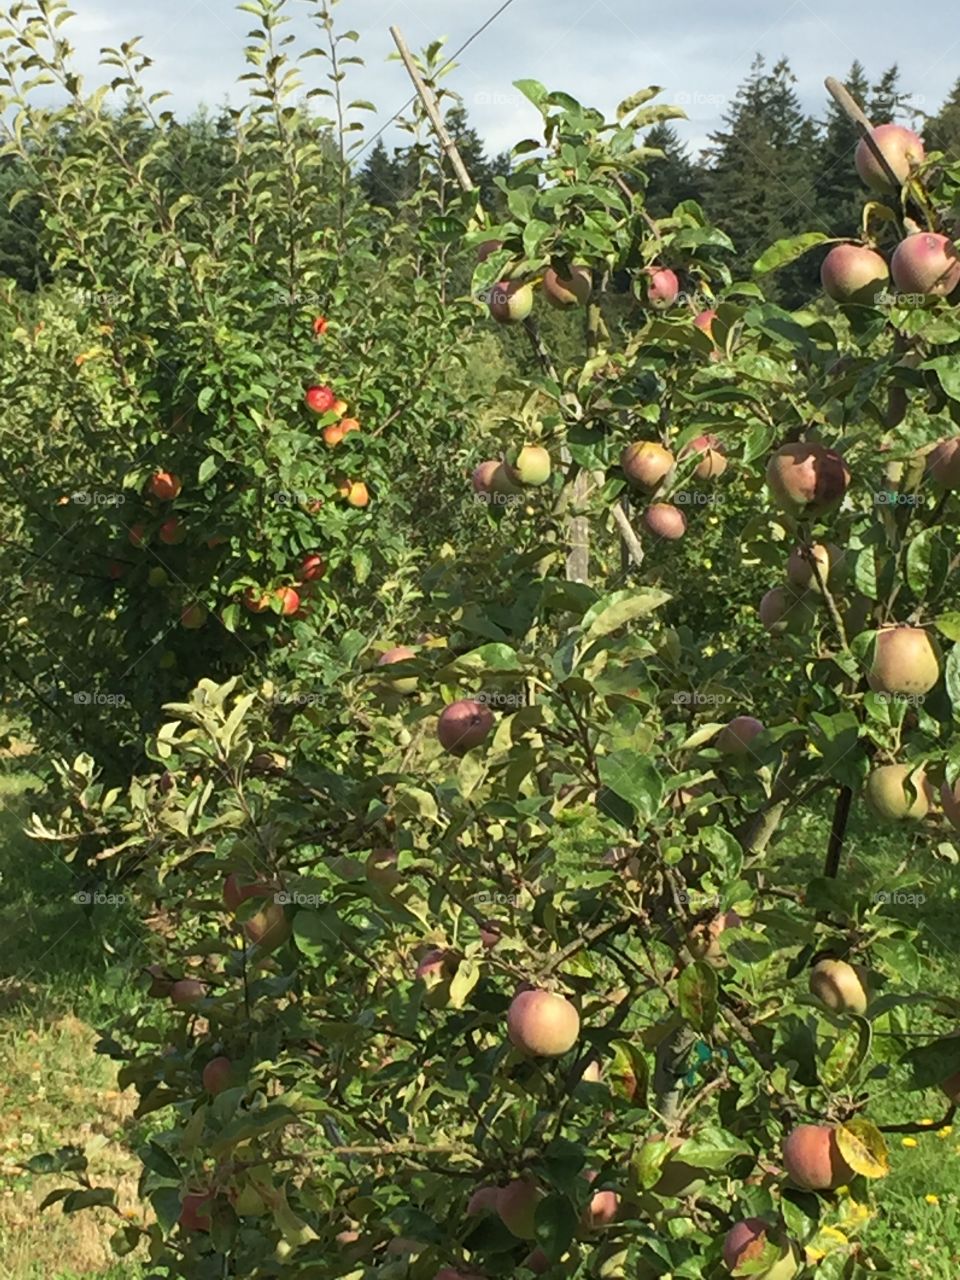 Apple trees growing at UBC Farm, amongst many other fruits and vegetables